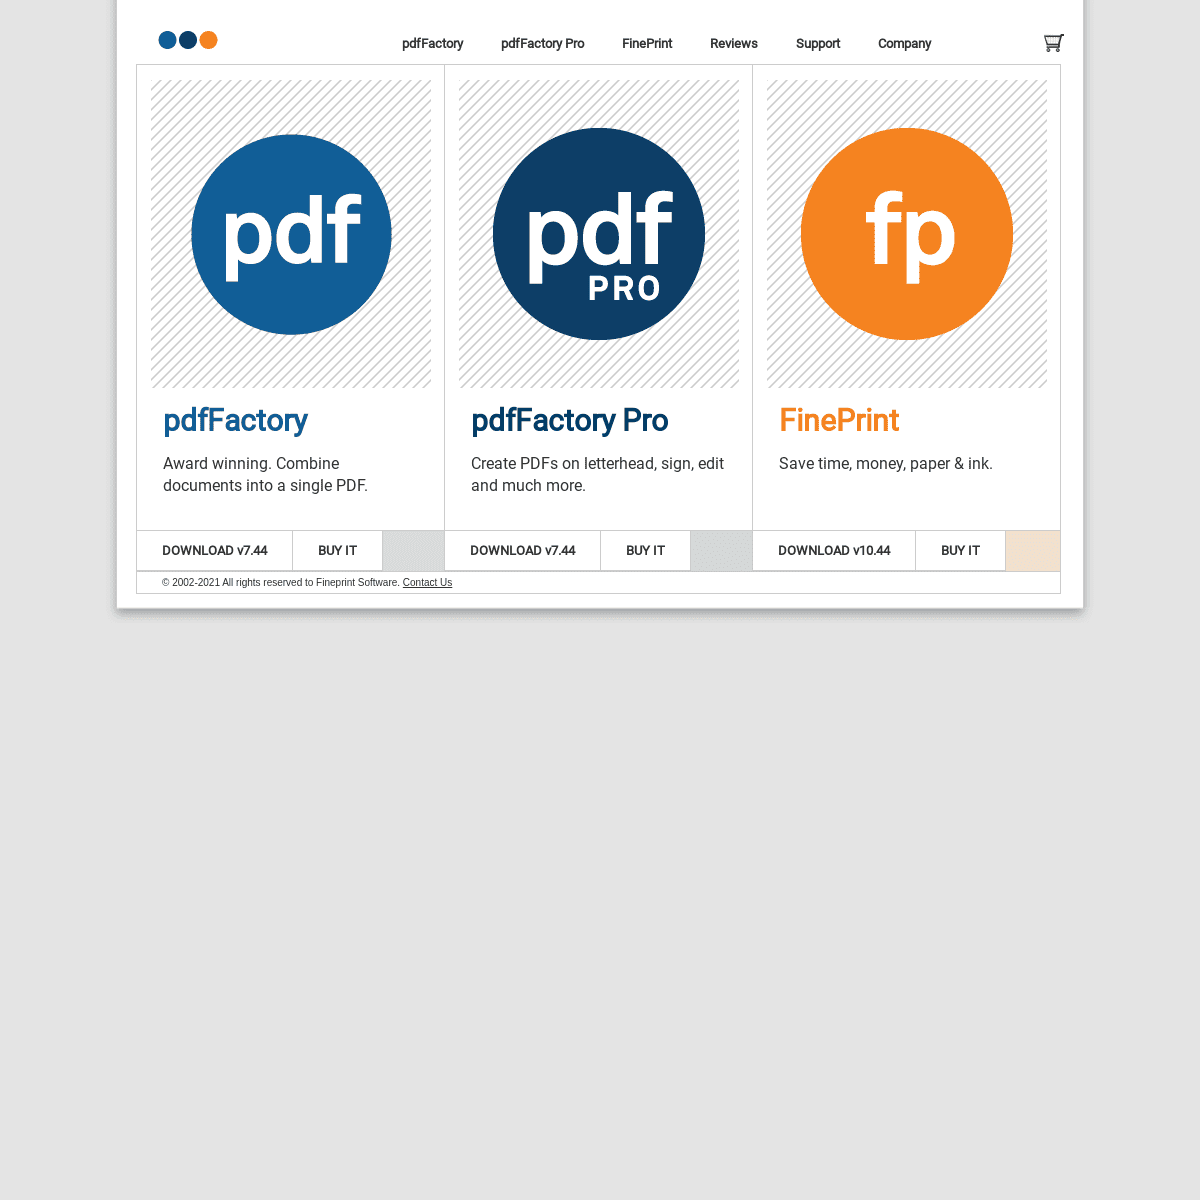 A complete backup of https://pdffactory.com